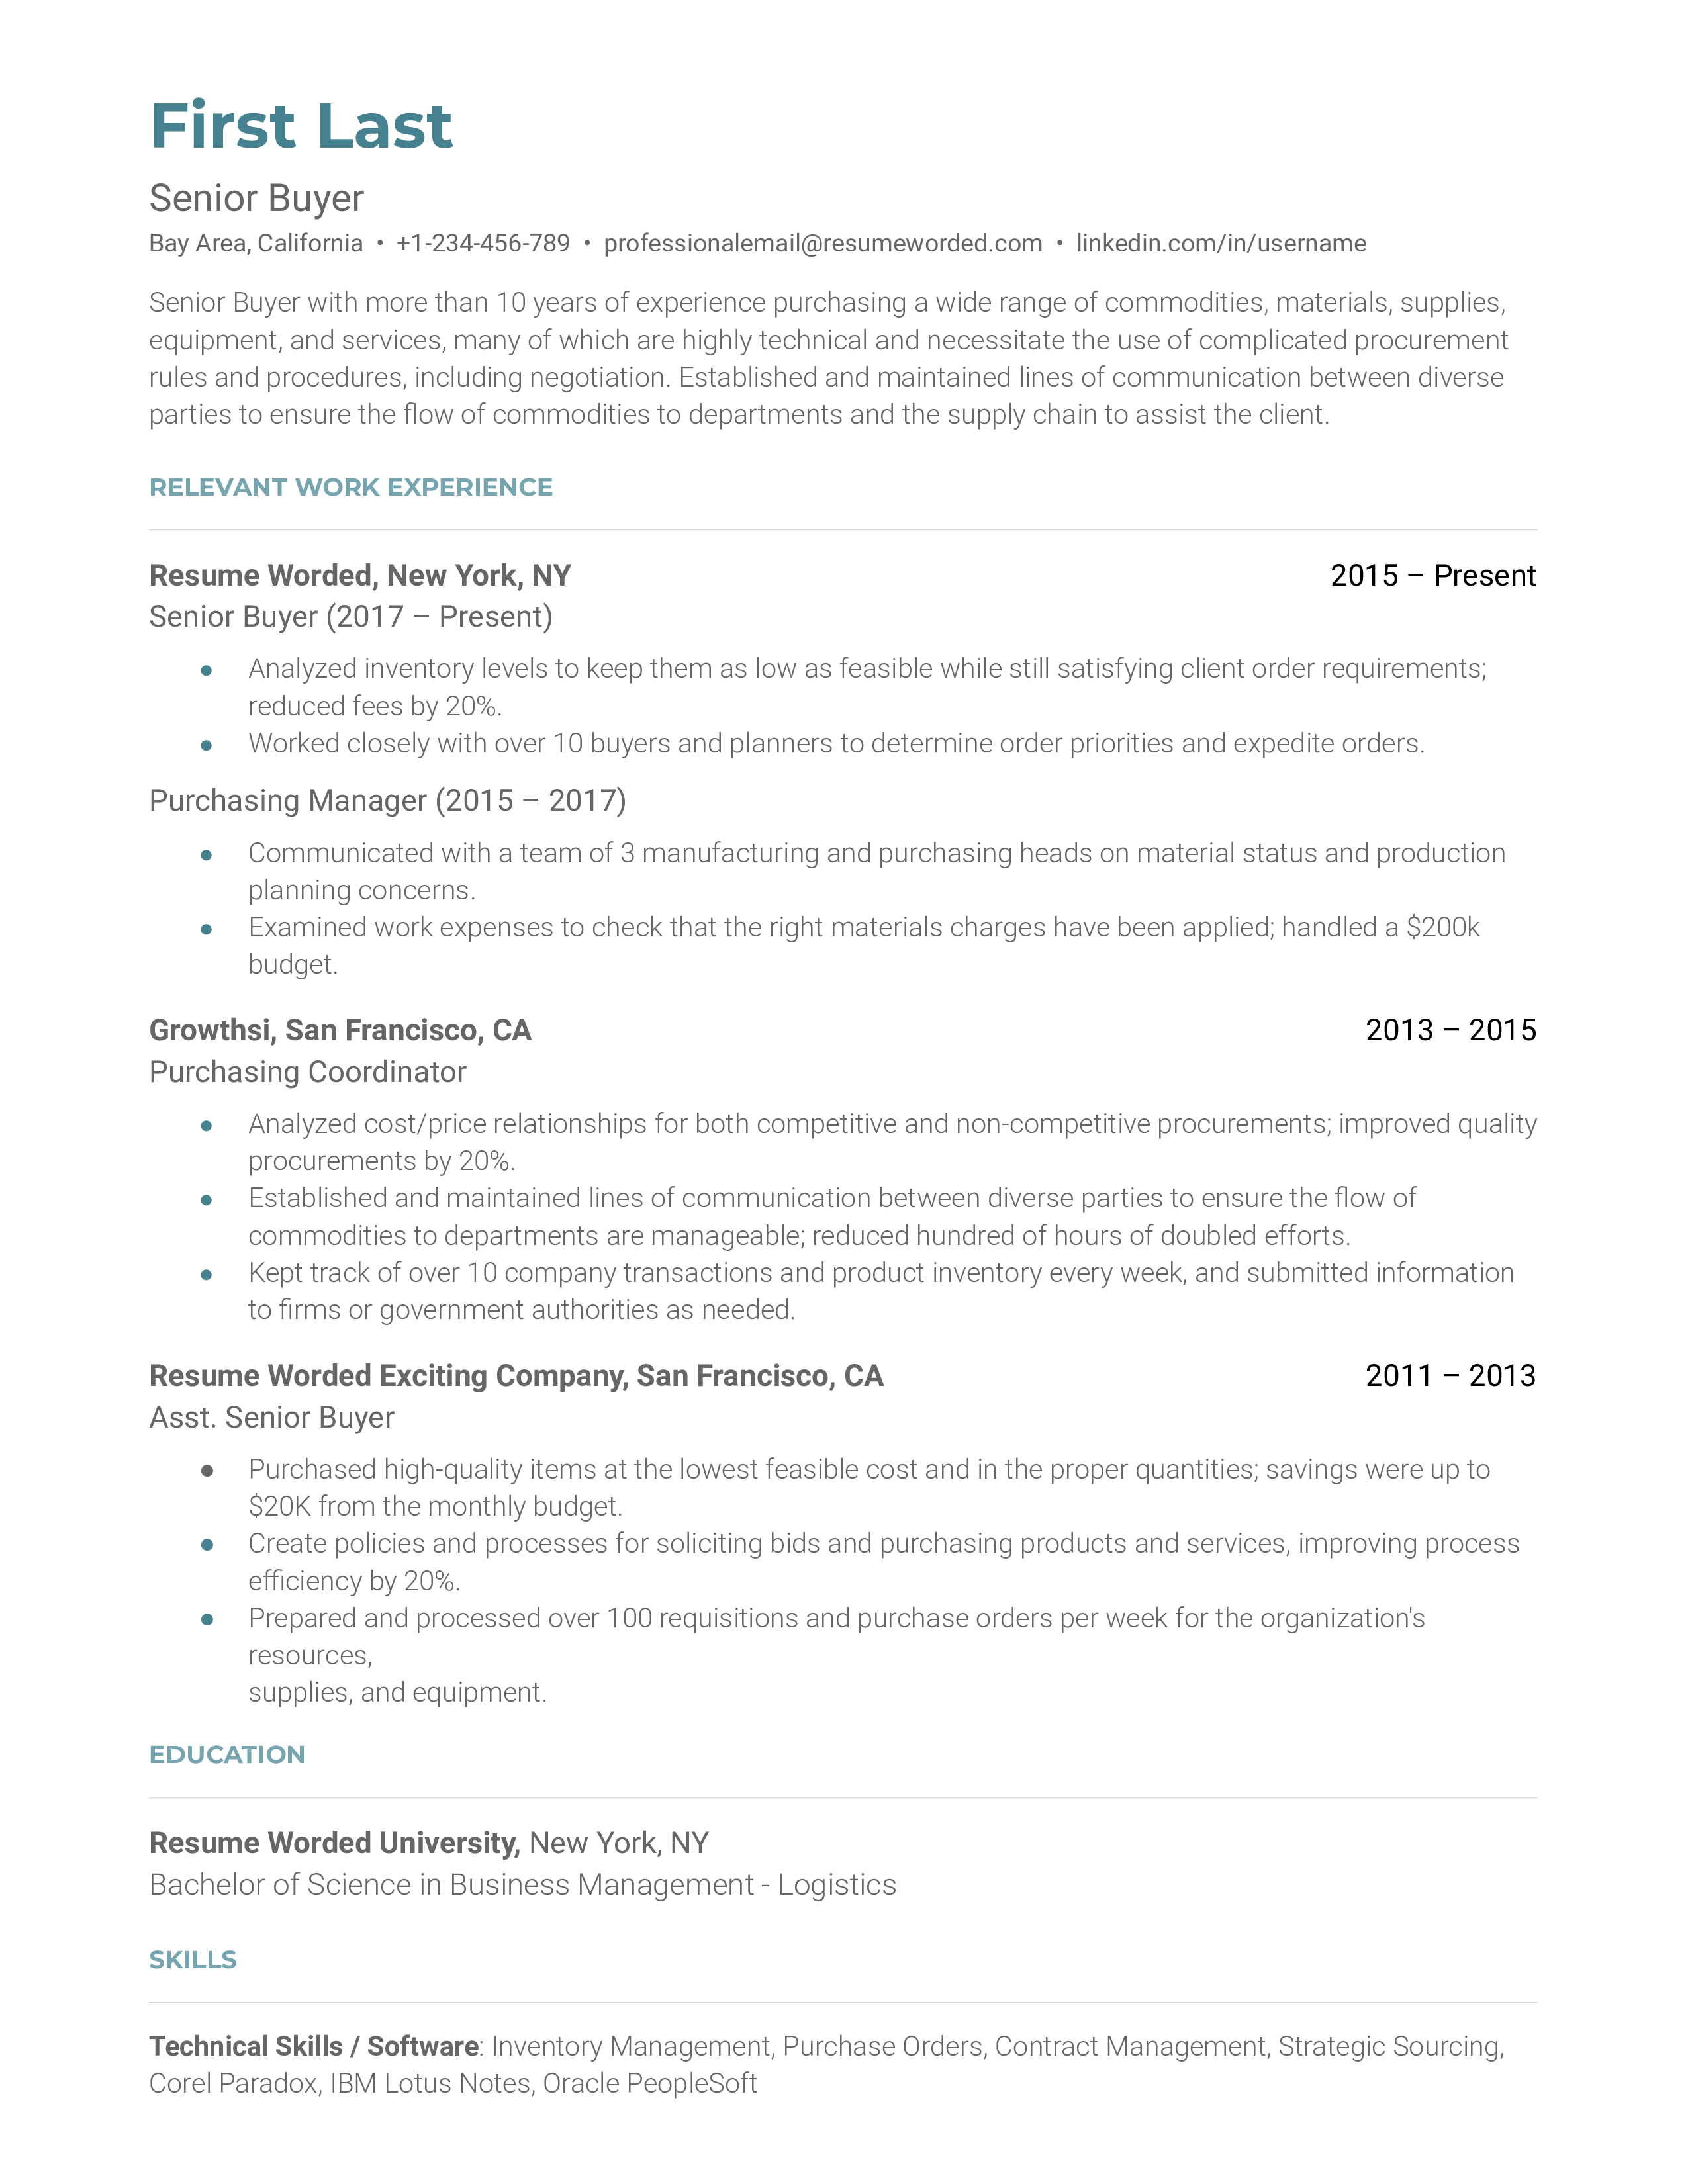 A senior buyer resume template that breaks its work history into several bullet points